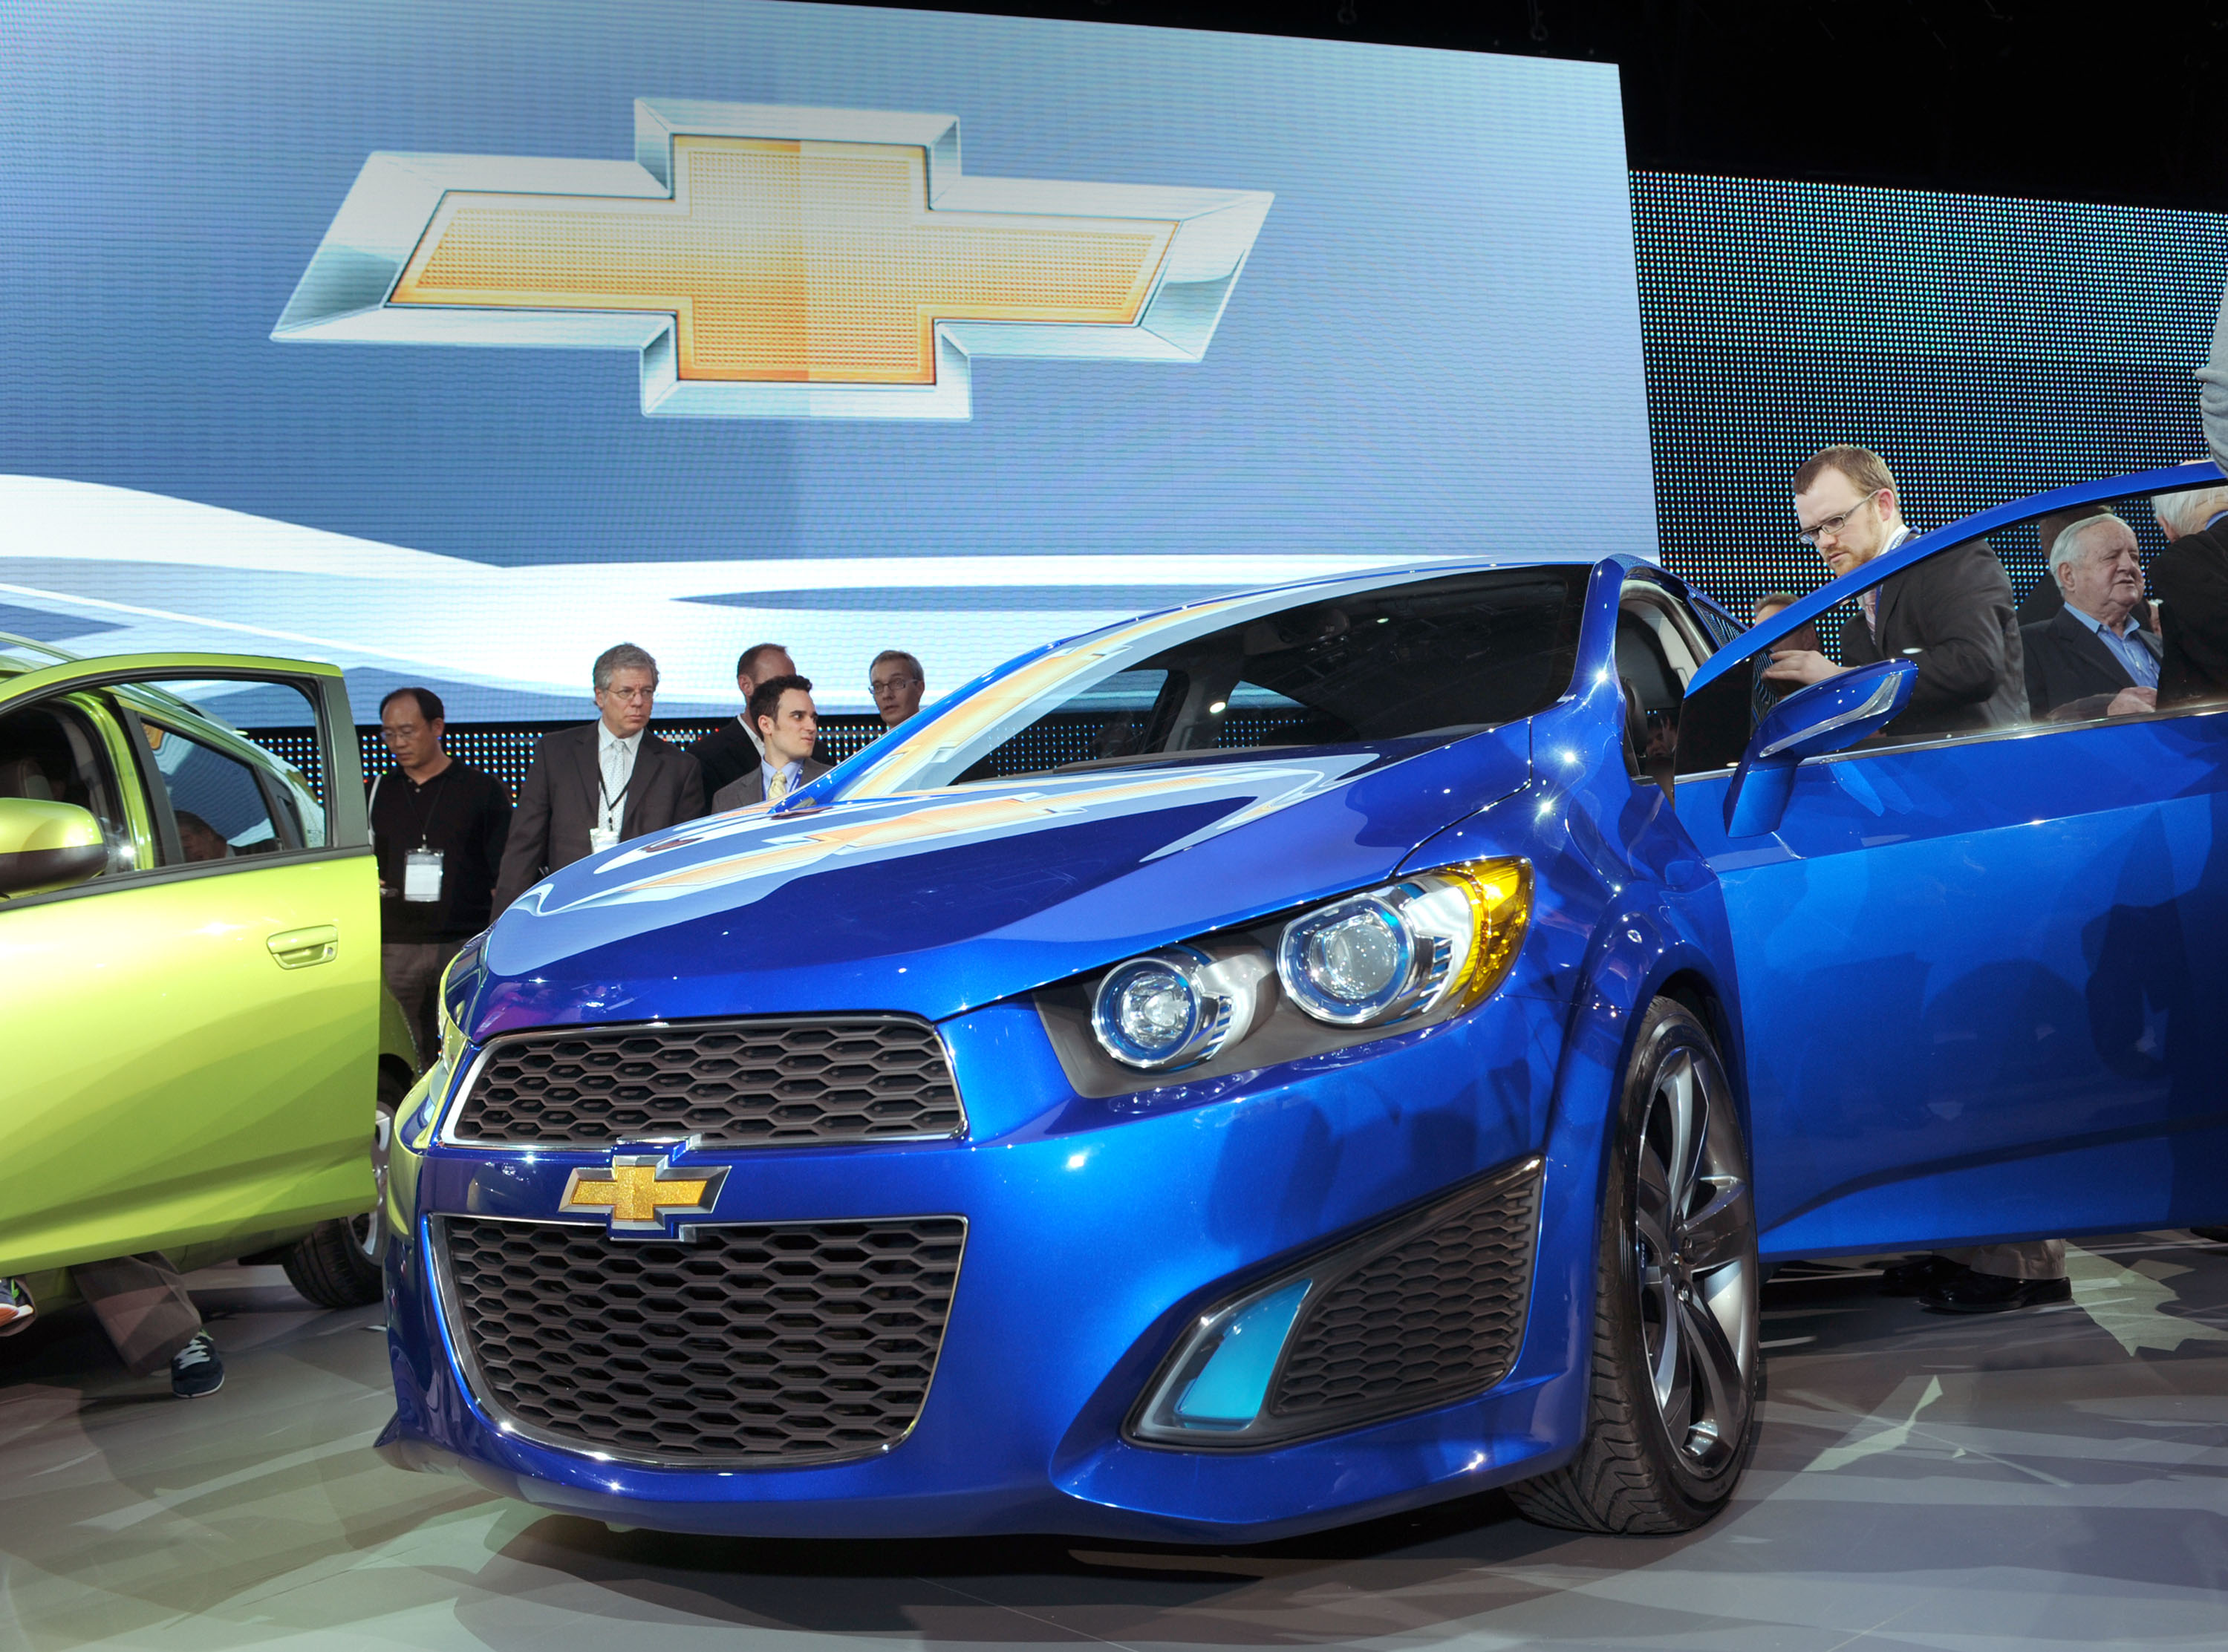 Chevy Puts Some Might In Its Mouse With The Aveo RS Concept